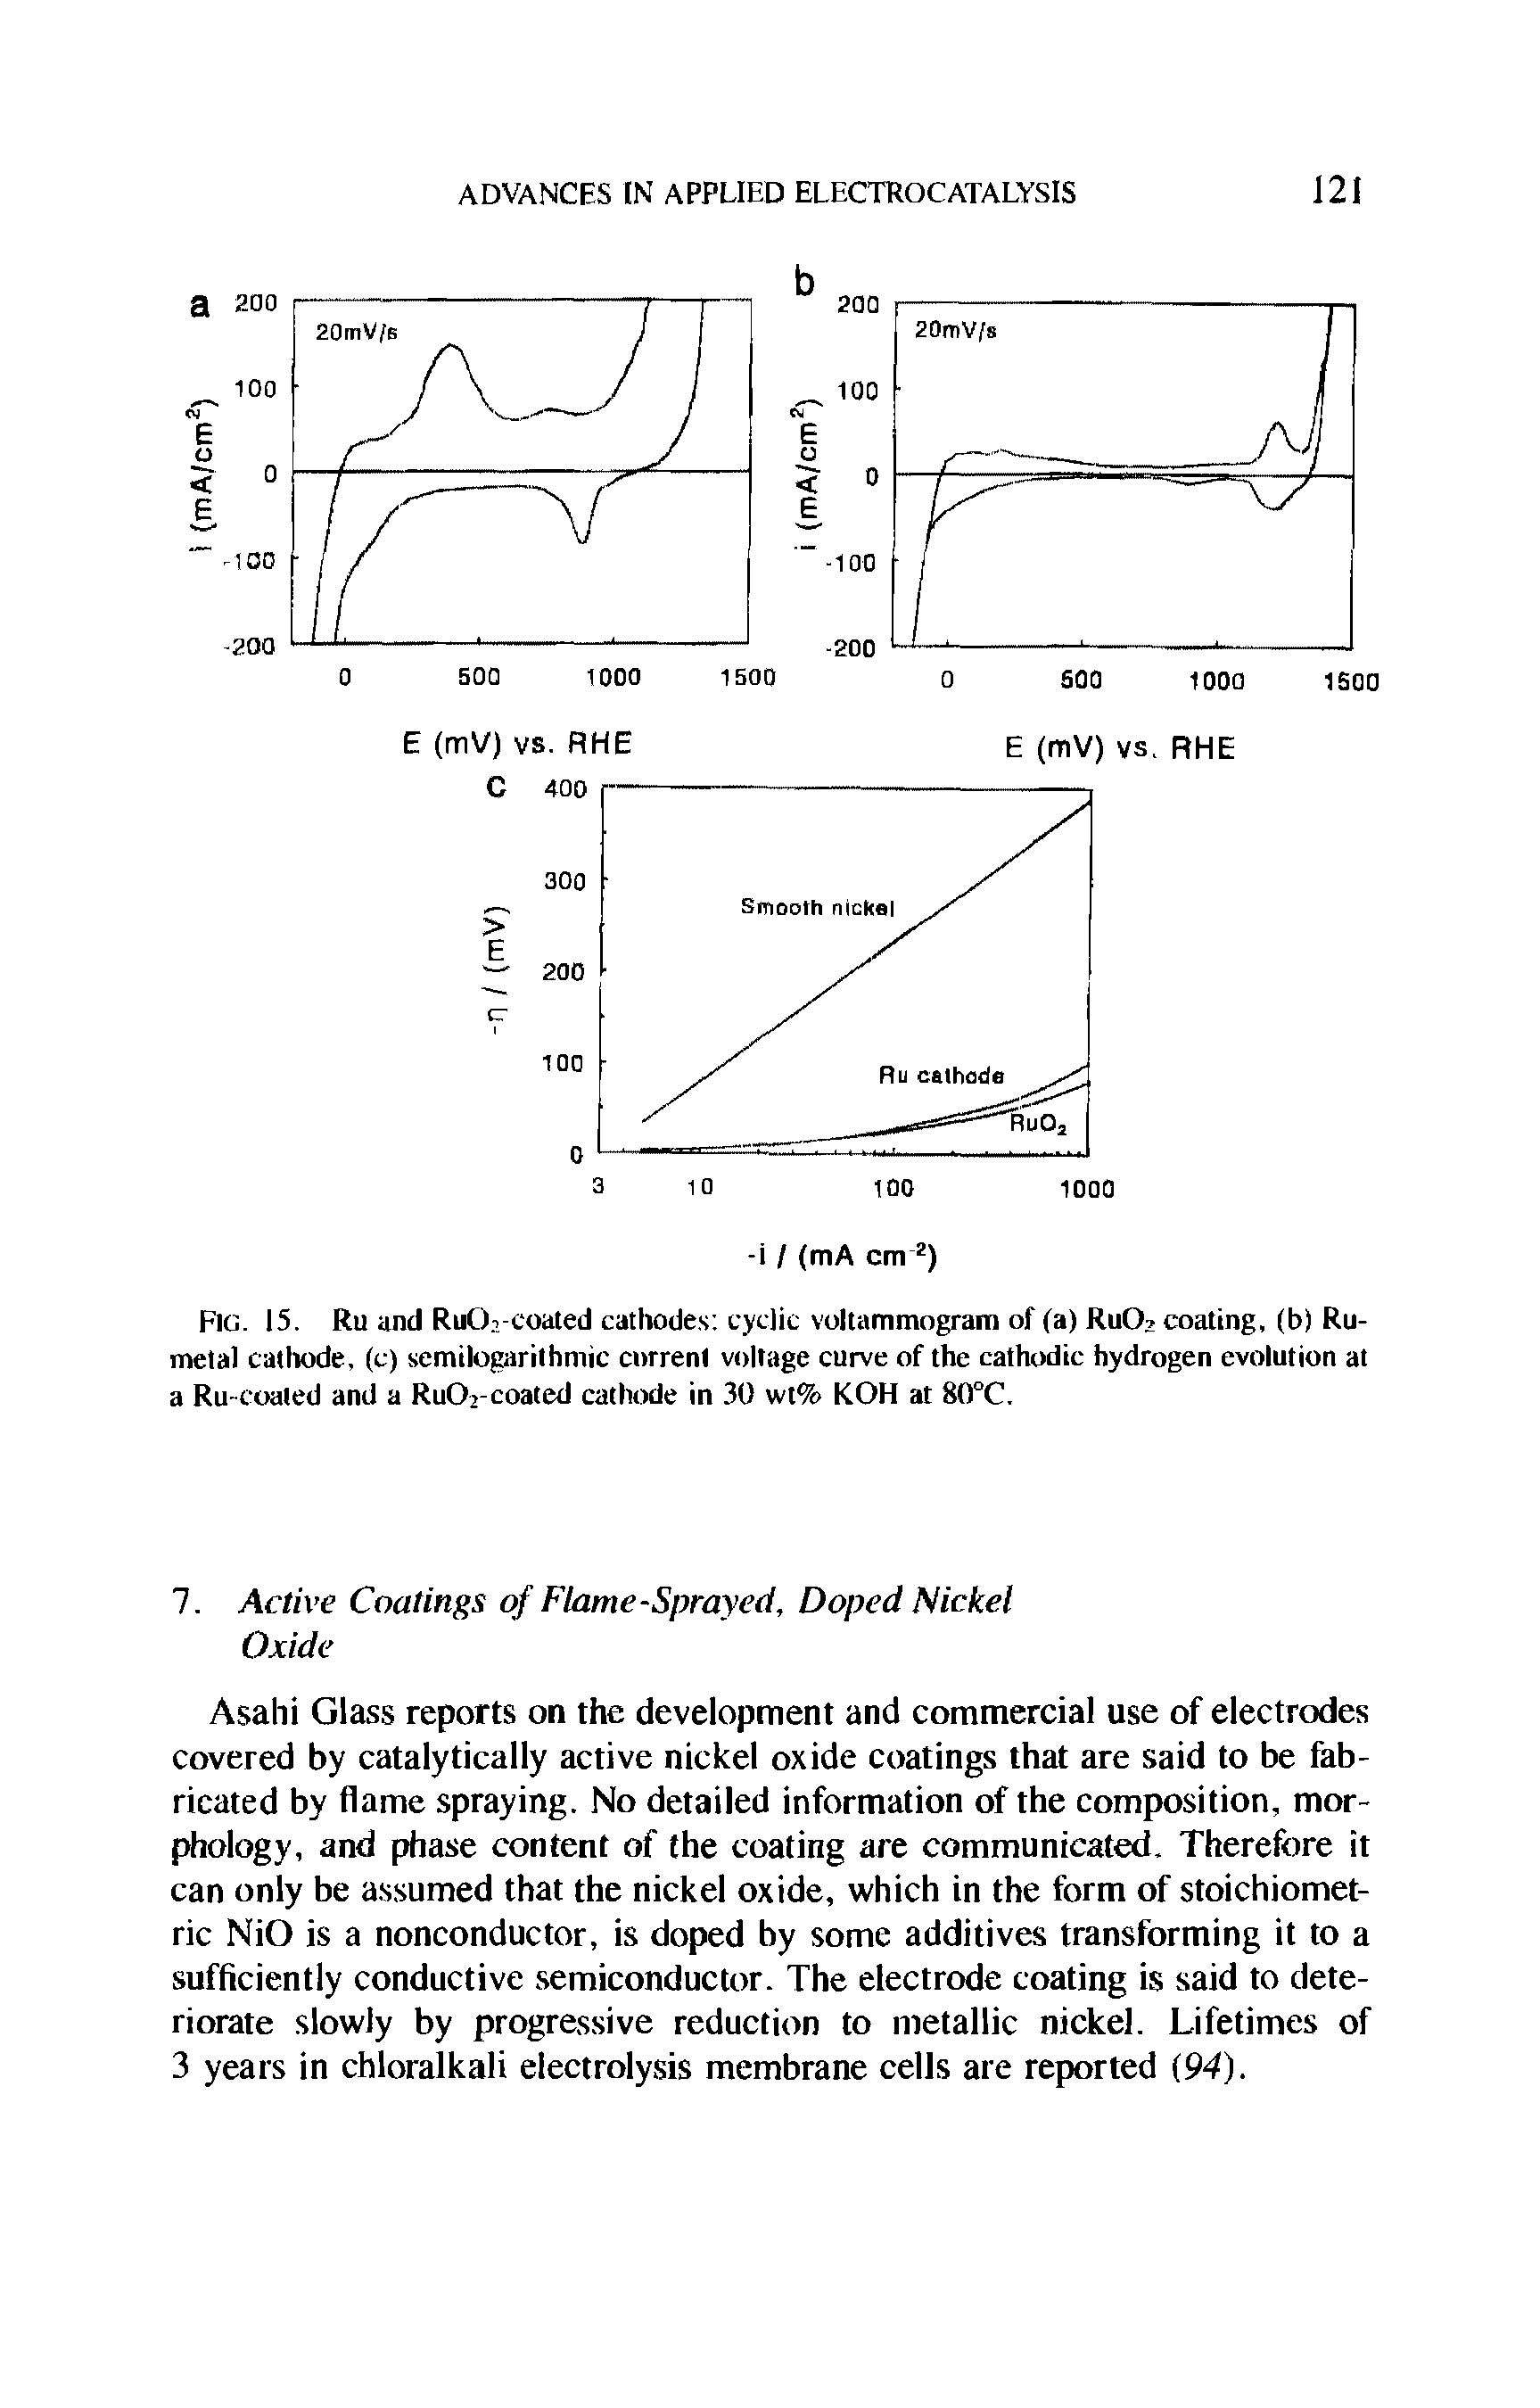 Fig. 15. Ru and RuOi-coated cathodes cyclic voltammogram of (a) RuO coating, (b) Ru-metal cathode, (c) semilogarithmic cnrrenl voltage curve of the cathodic hydrogen evolution at a Ru-coated and a RuO >-coated cathode in 30 wt% KOH at 80°C.